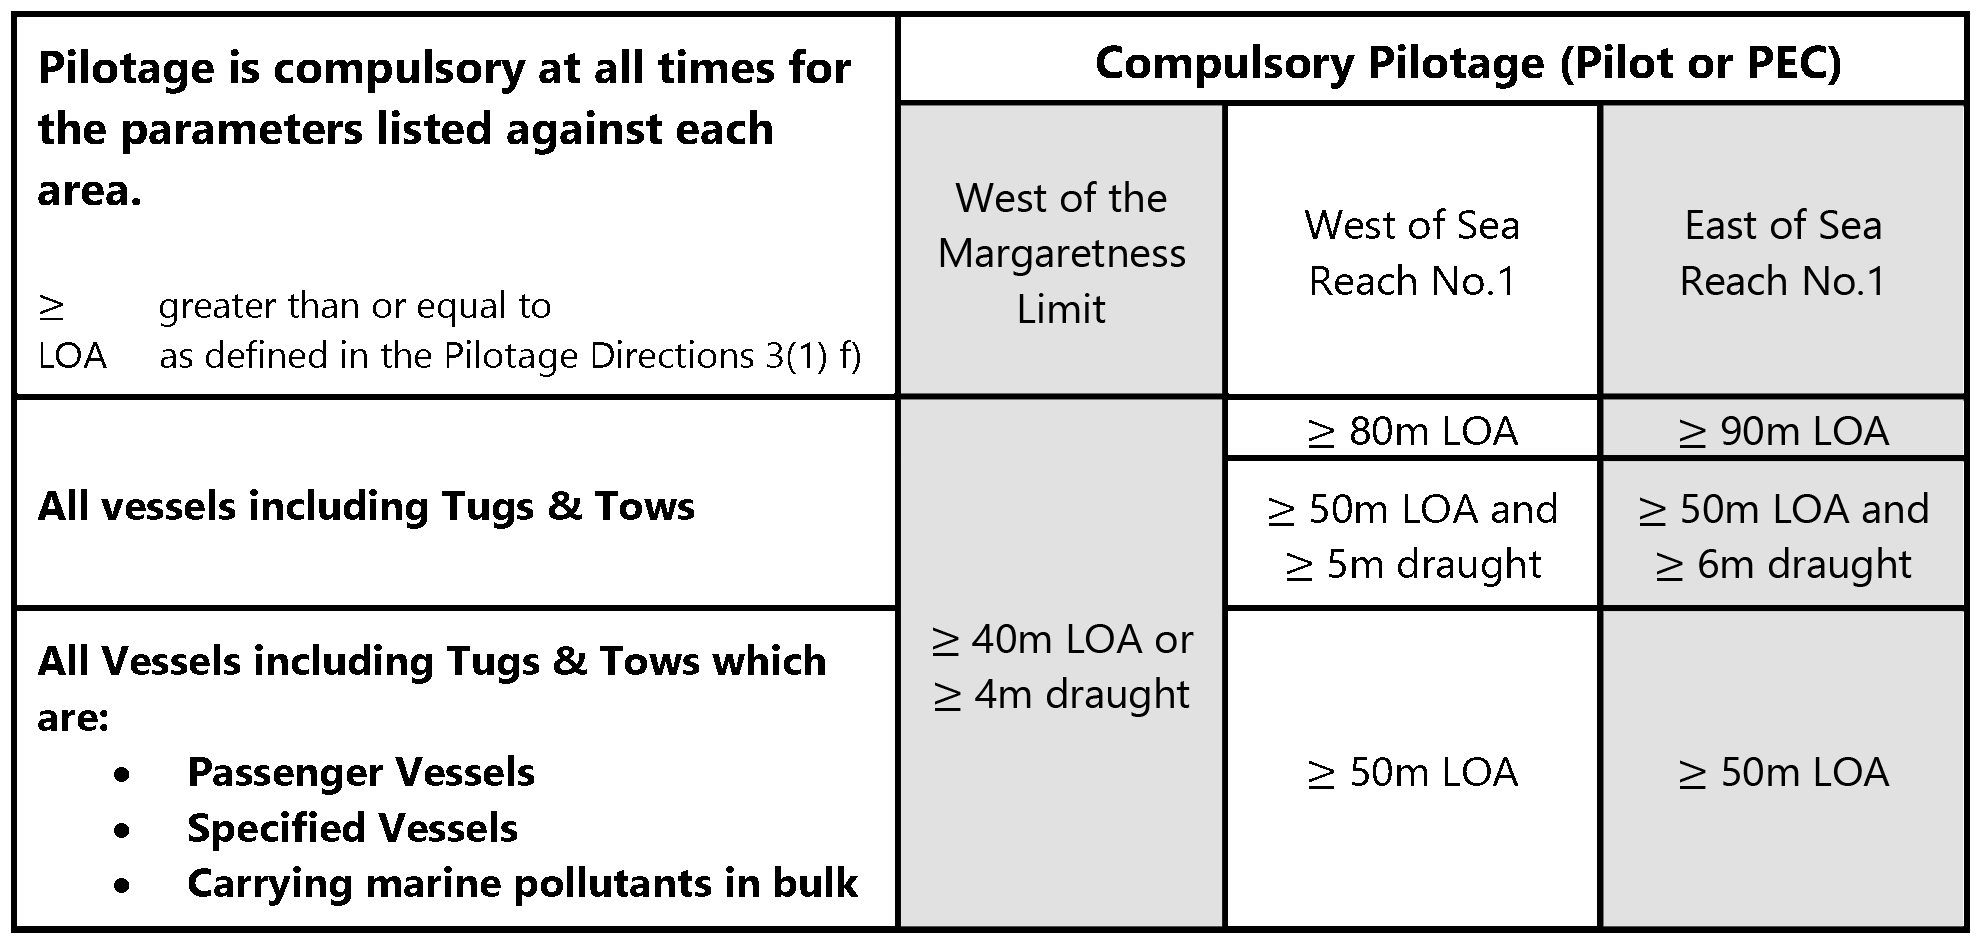 Table showing requirements for pilotage